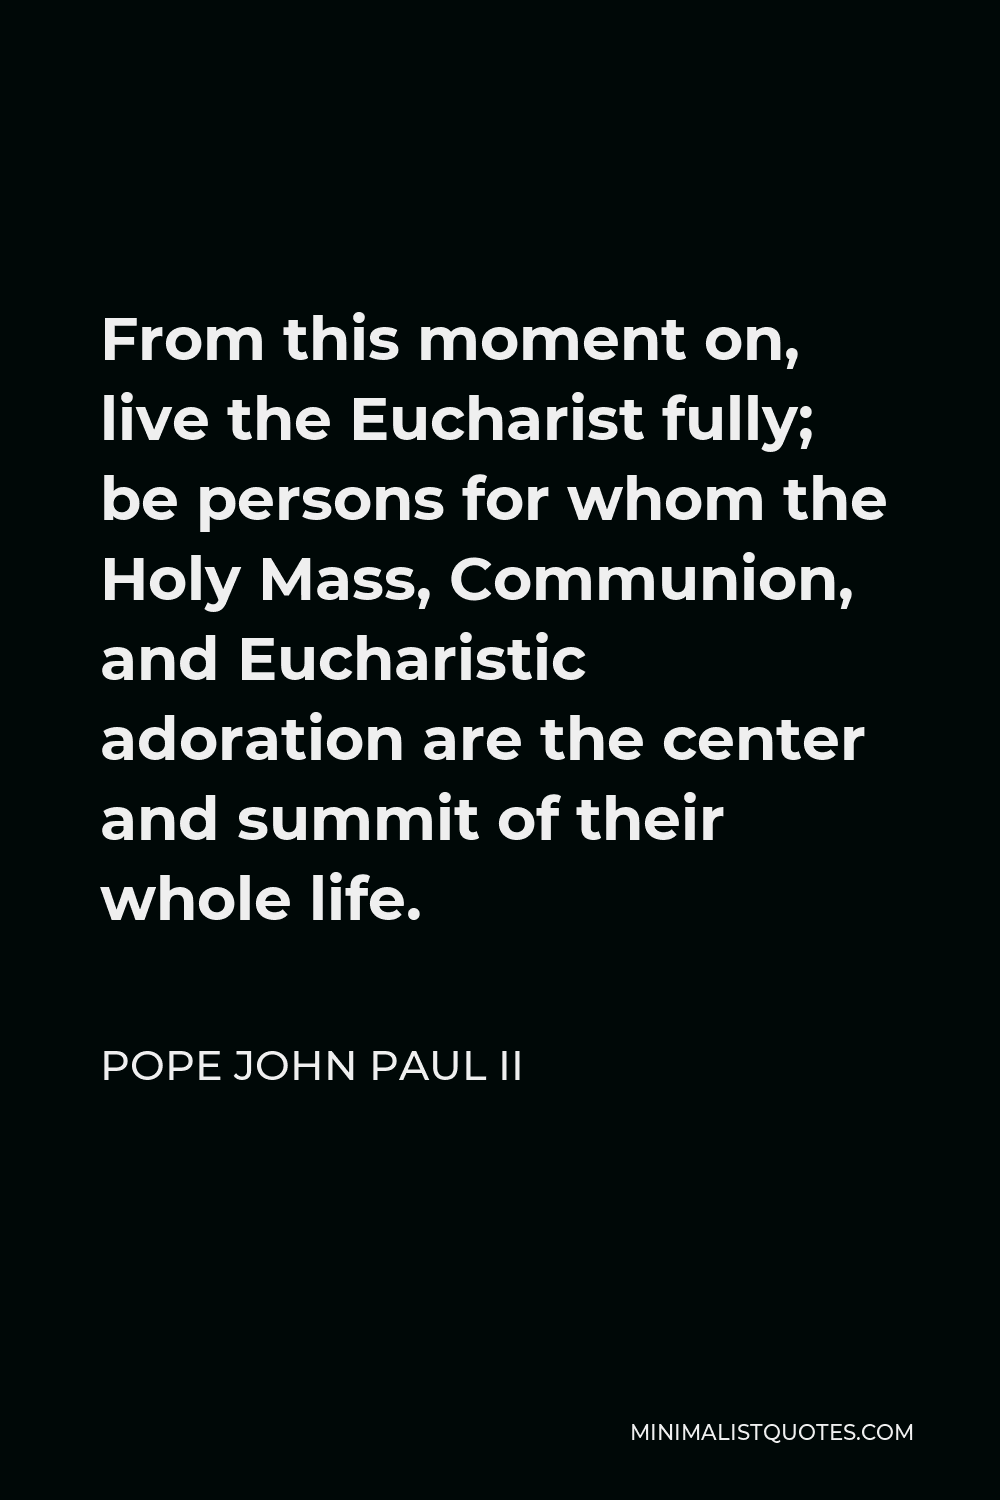 Pope John Paul II Quote - From this moment on, live the Eucharist fully; be persons for whom the Holy Mass, Communion, and Eucharistic adoration are the center and summit of their whole life.